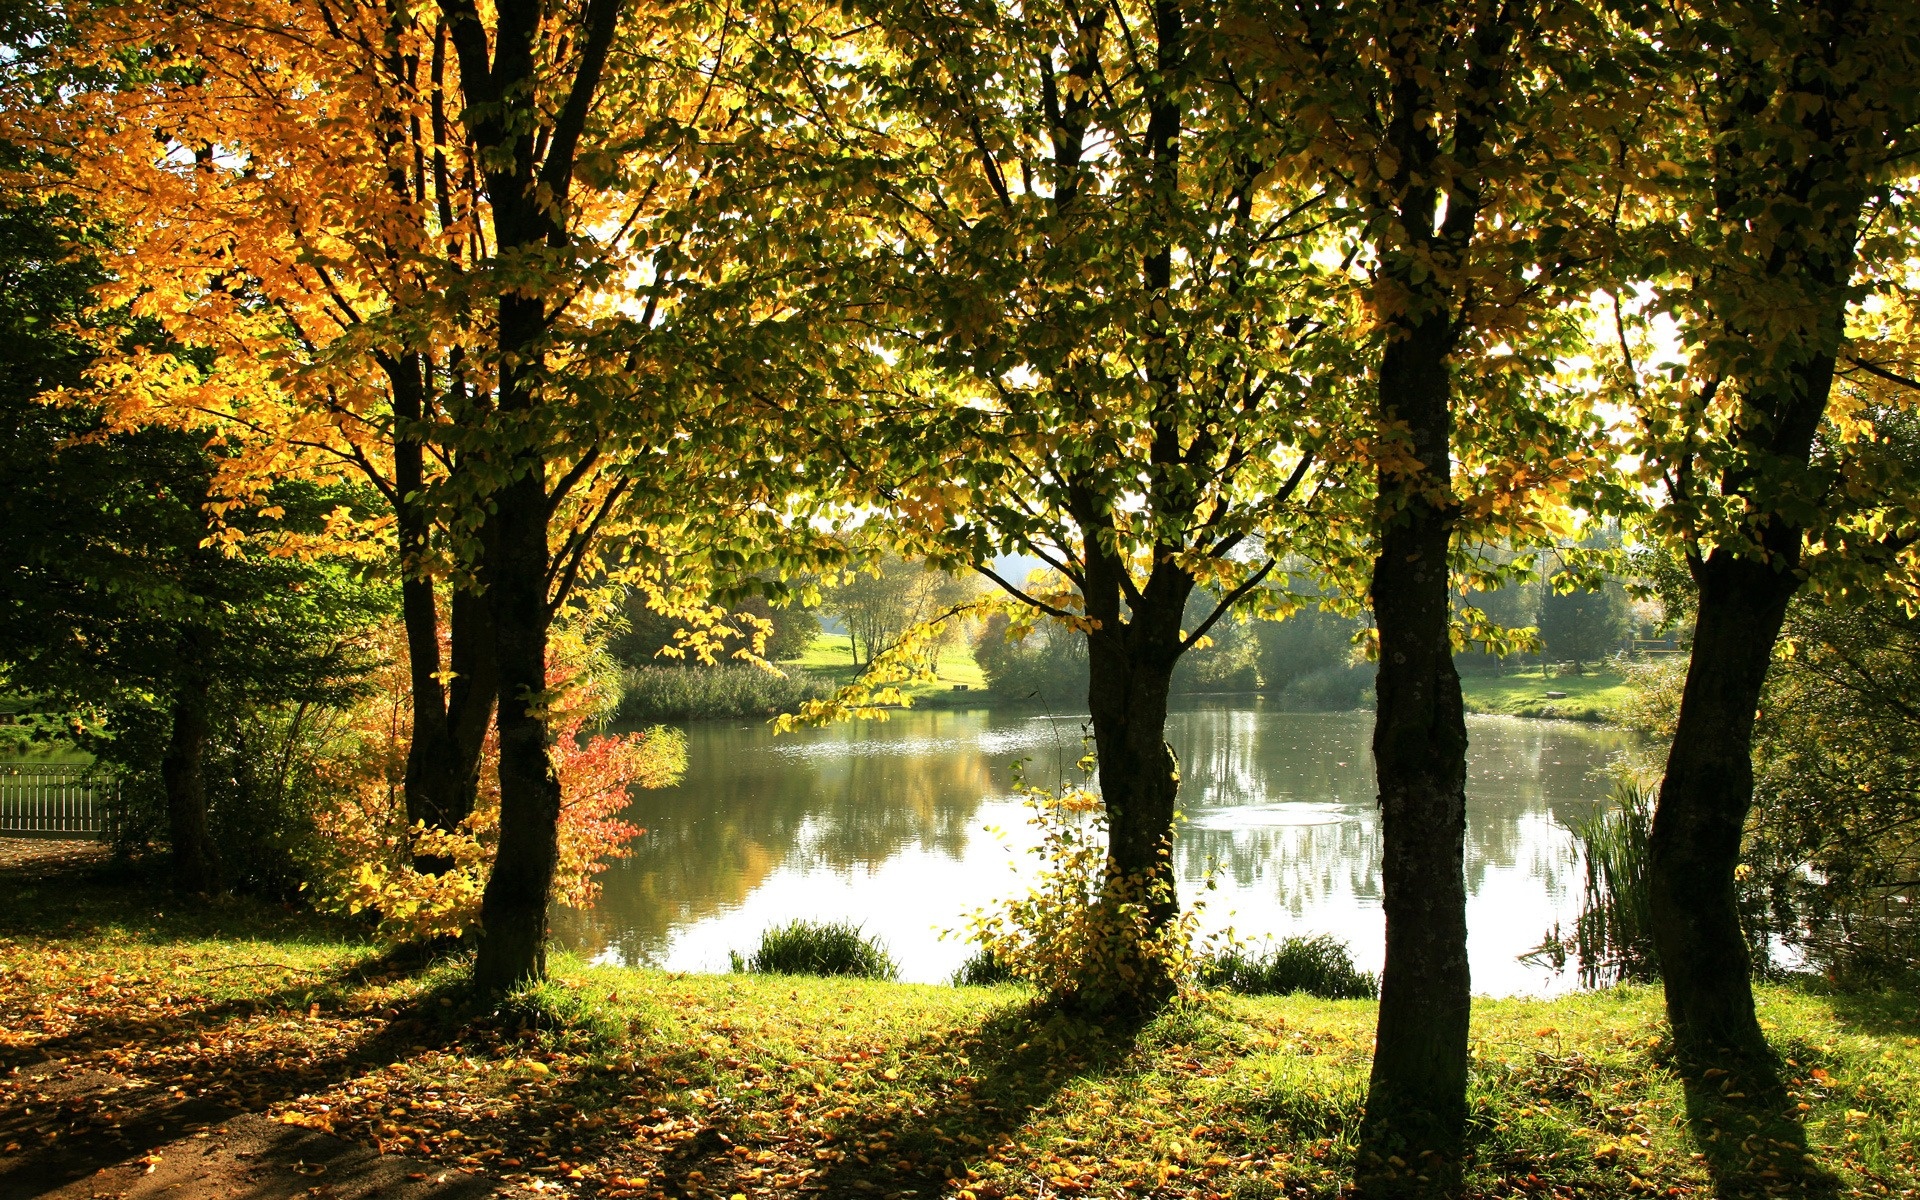 Lake in the Middle of Autumn Forest